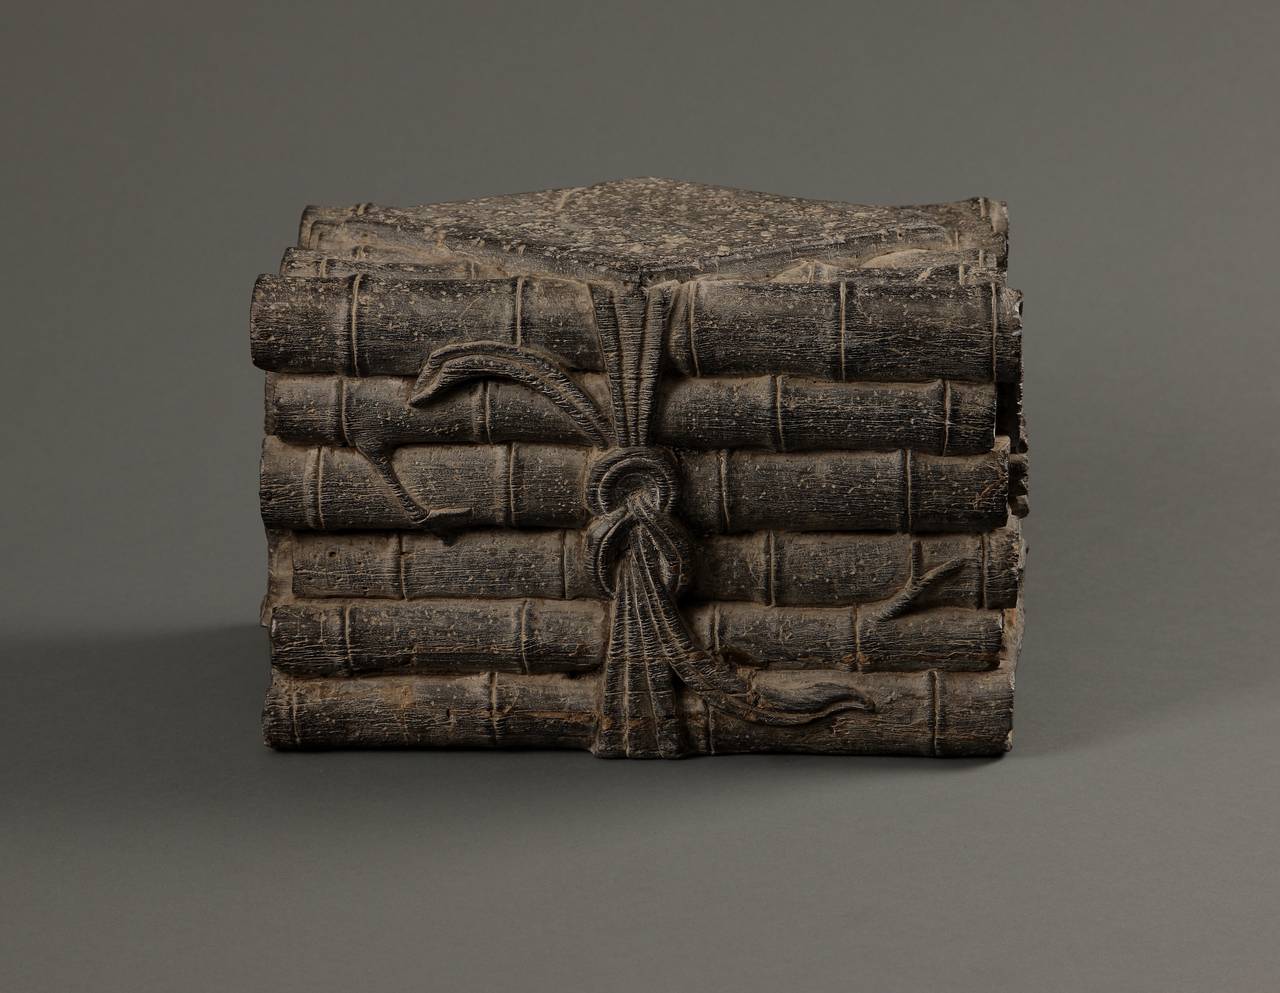 A pair of black stone sculptures carved to depict a Chinese bookshelf of scrolls.